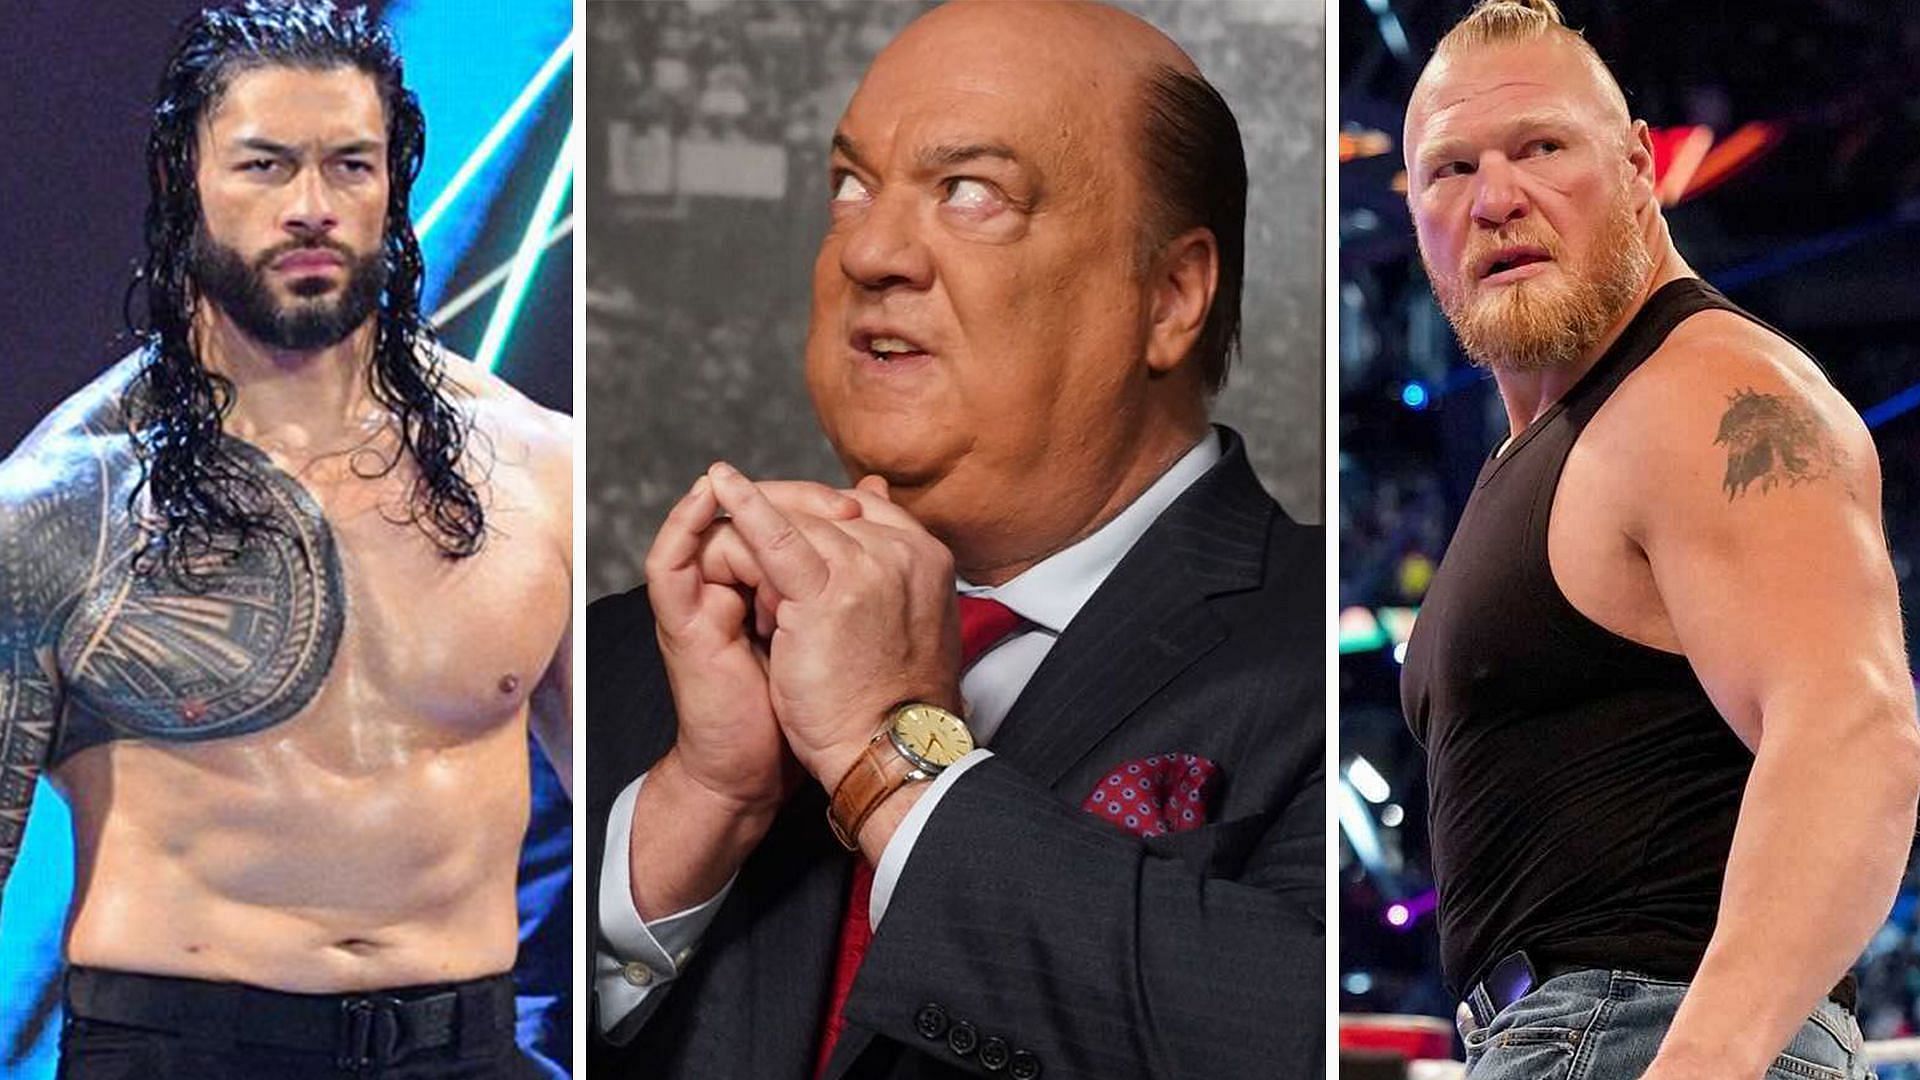 Who do you think Paul Heyman will side with?